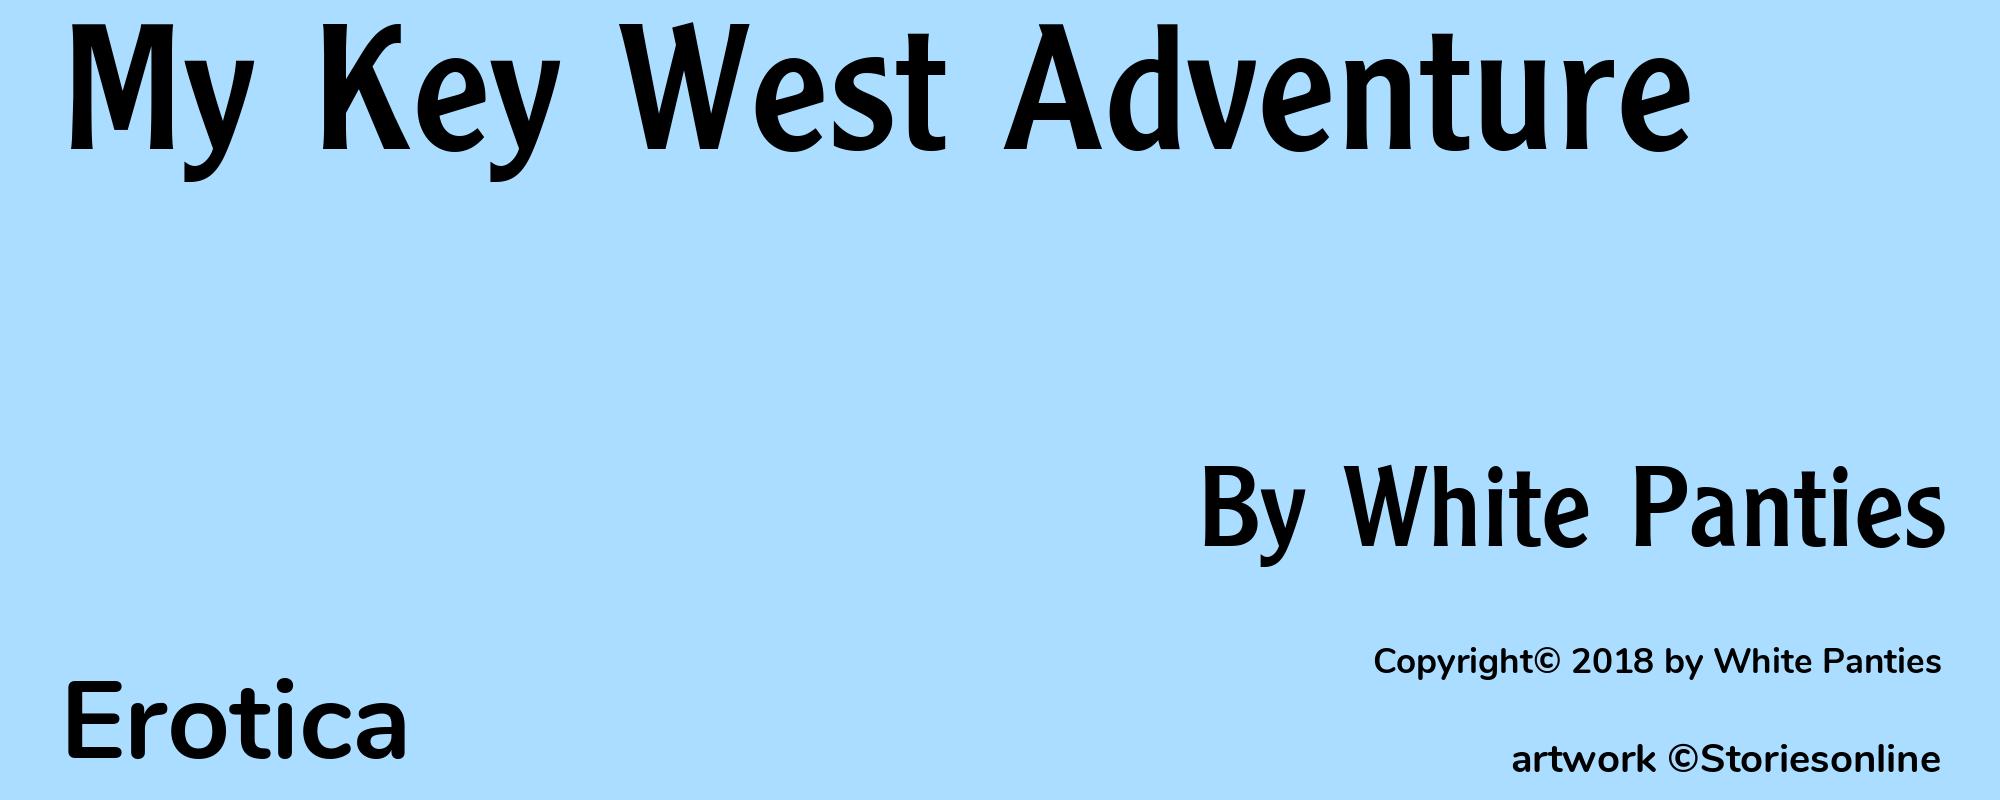 My Key West Adventure - Cover